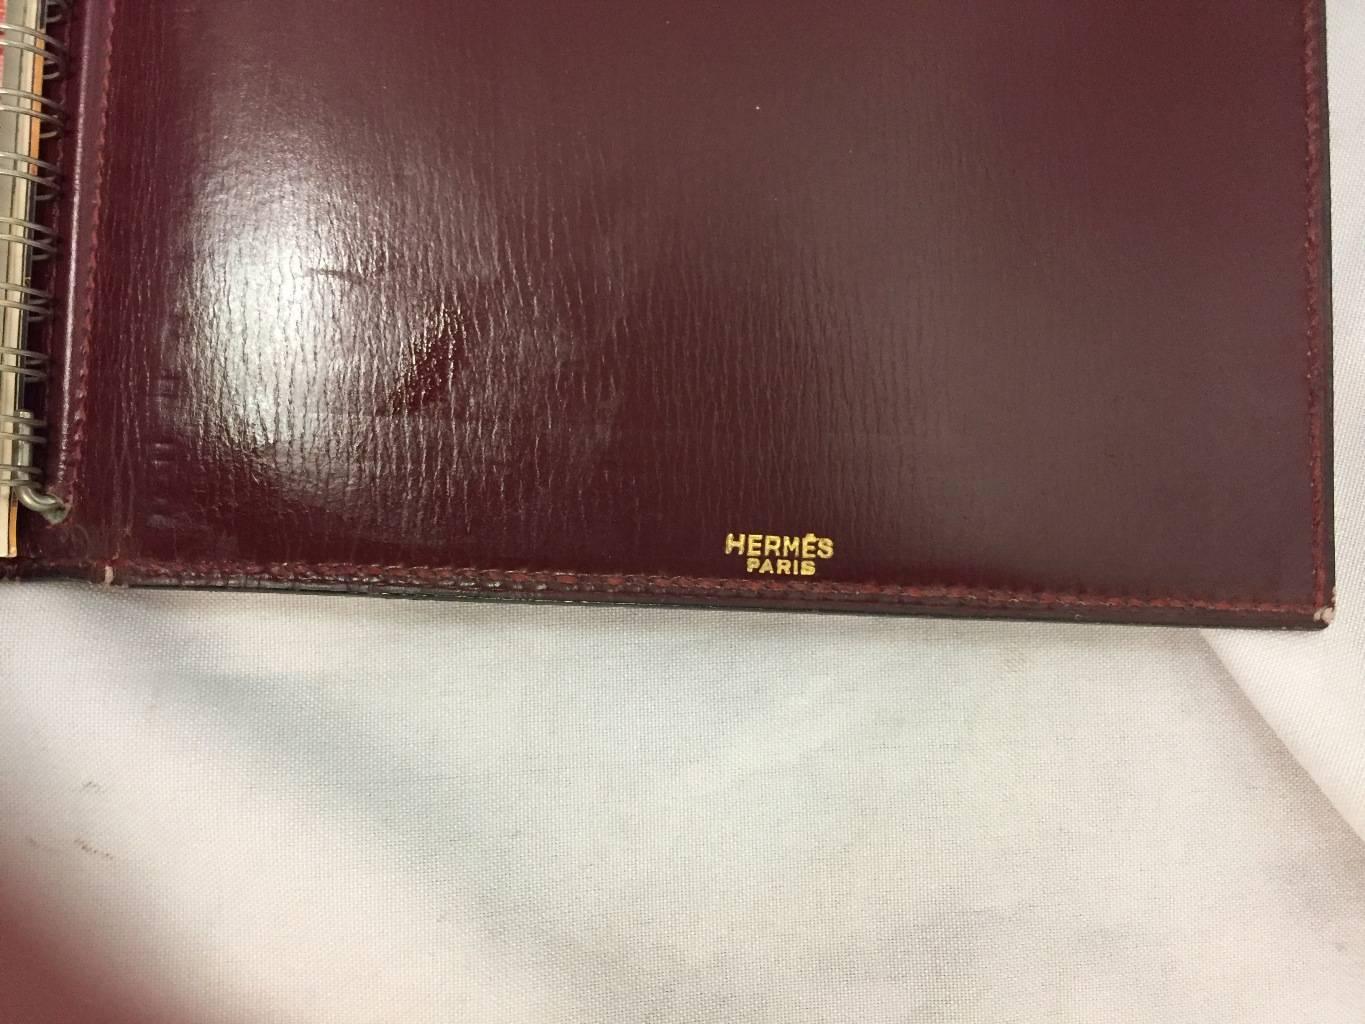 French Hermes Leather Agenda Cover Day Planner For Sale